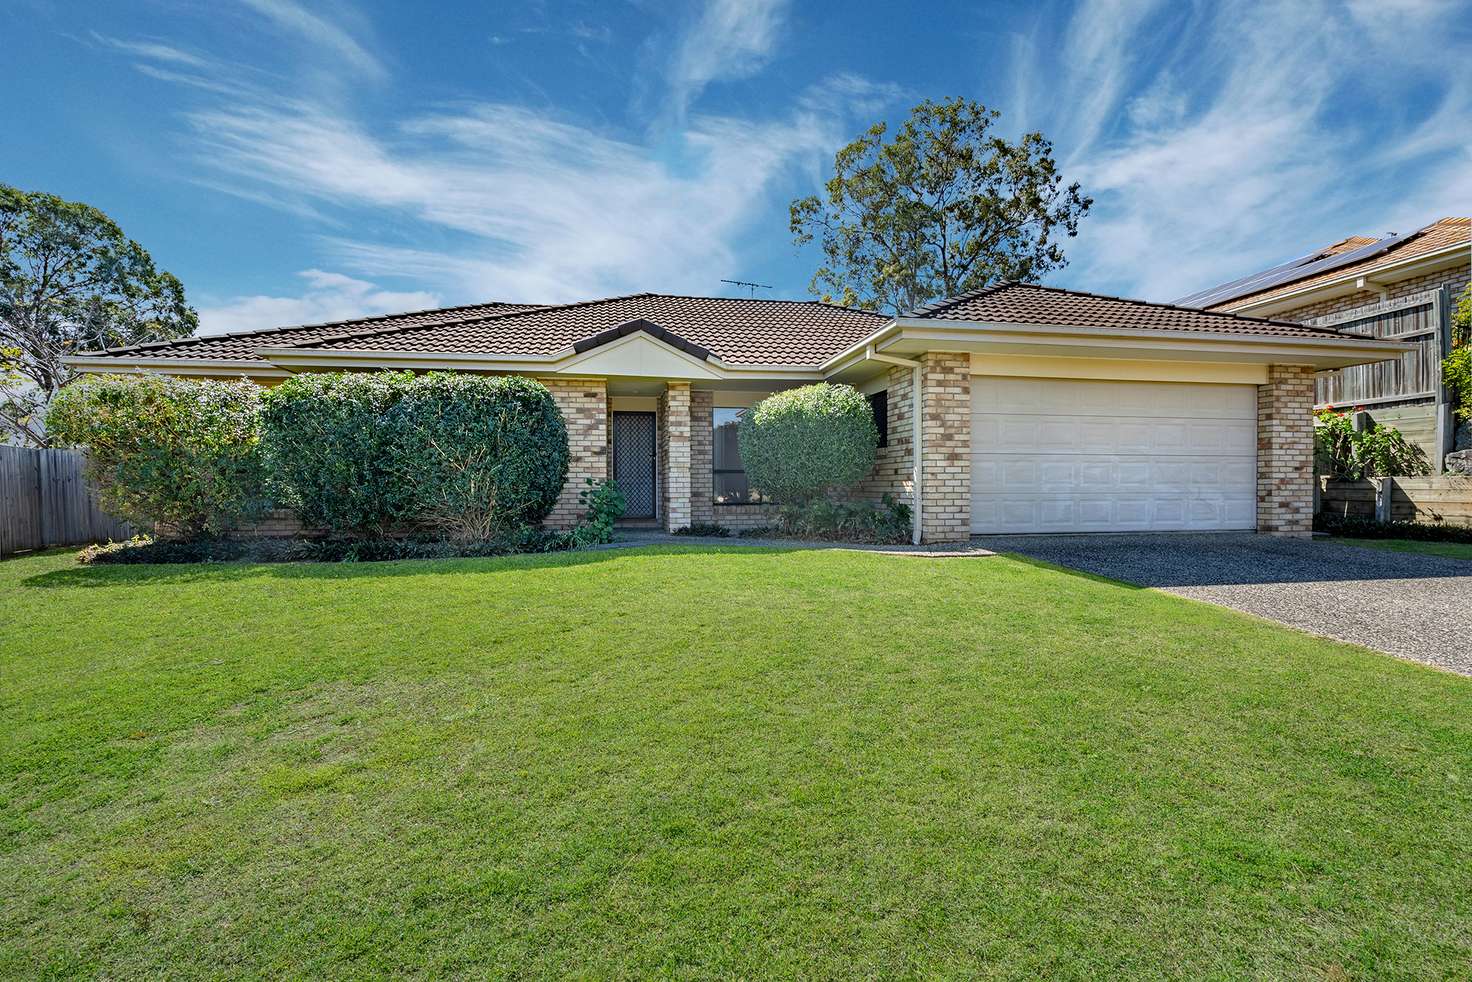 Main view of Homely house listing, 12 Hinterwood Ct, Edens Landing QLD 4207